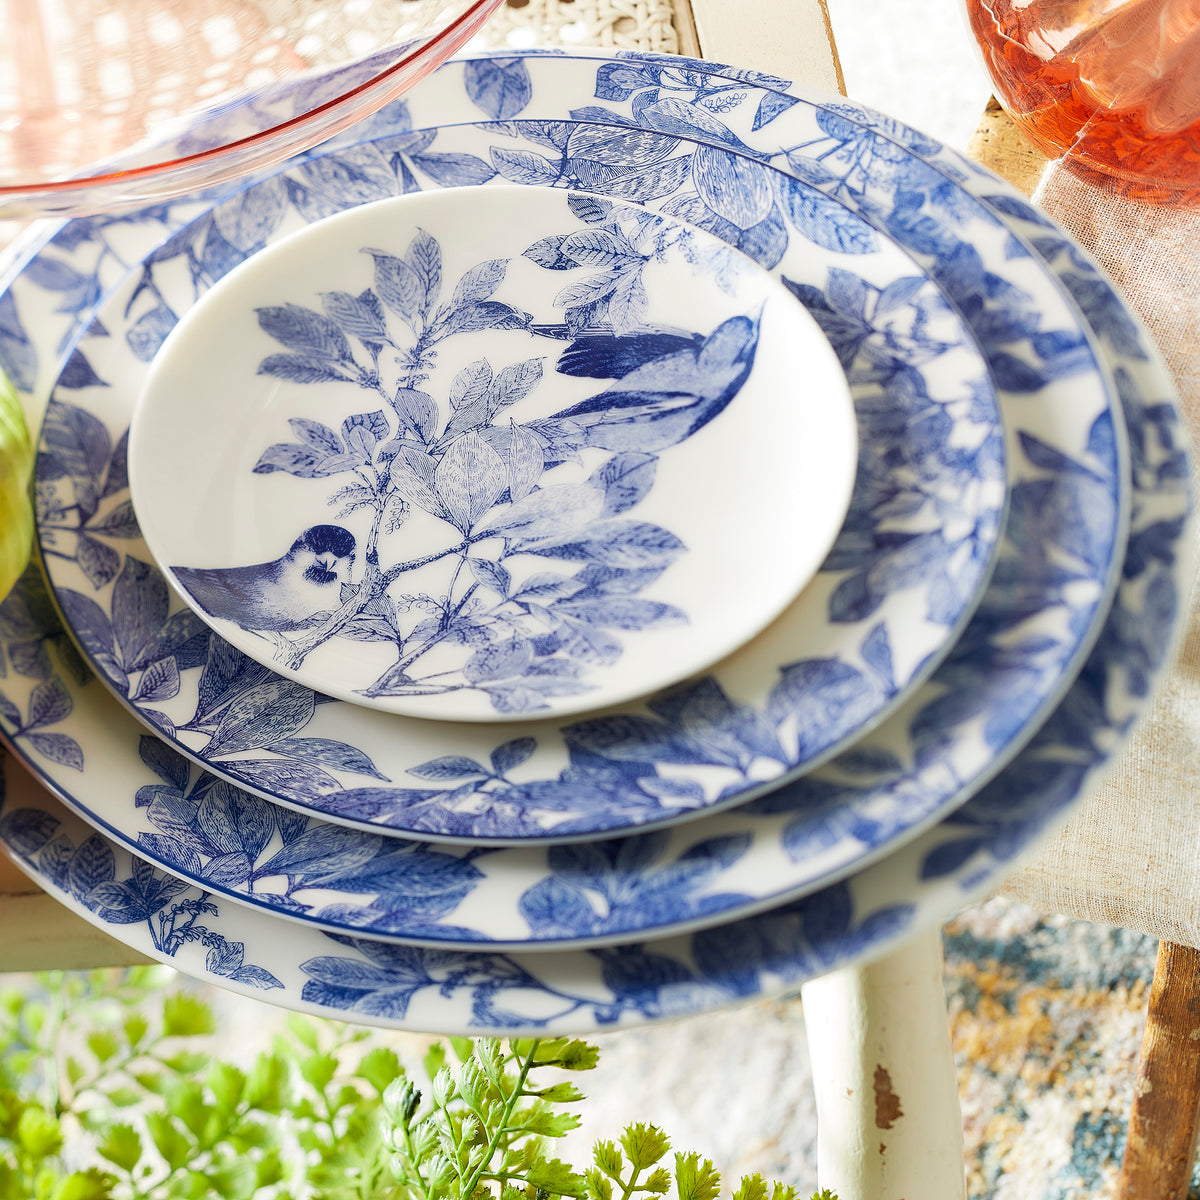 Stack of Arbor Blue Birds Small Plates by Caskata Artisanal Home, featuring blue and white dinner plates with bird and leafy branches porcelain patterns, arranged from largest to smallest.